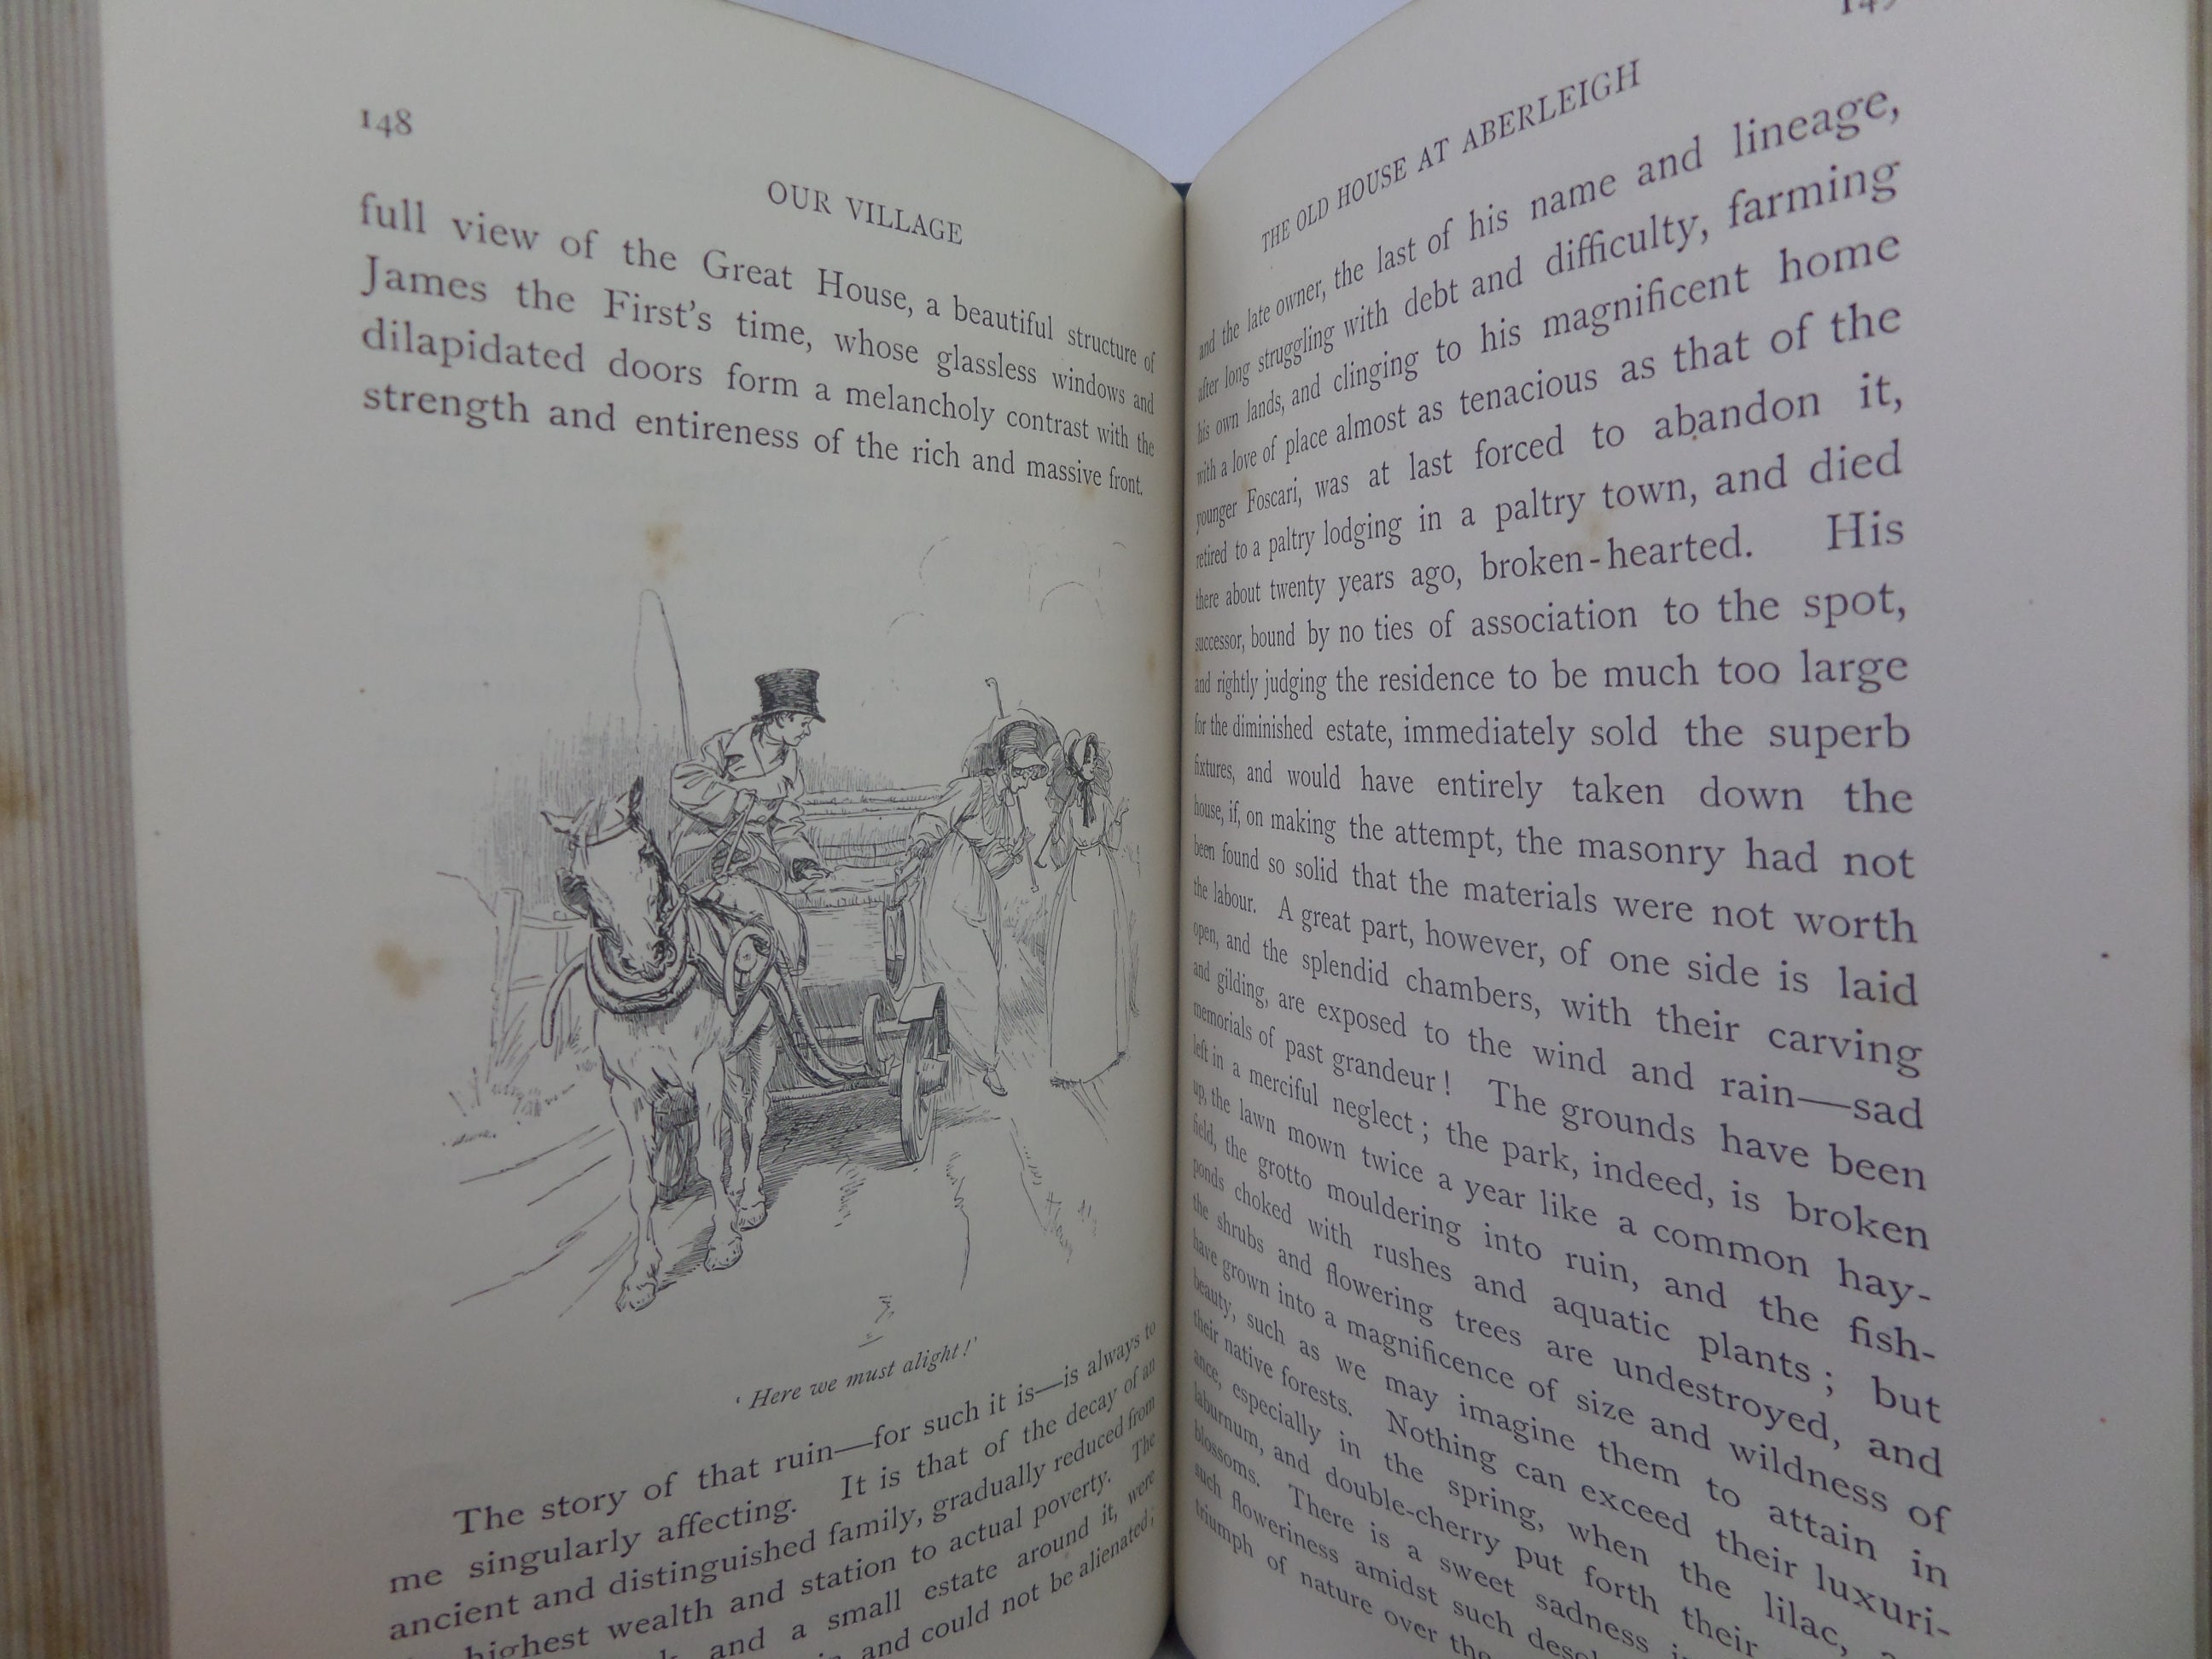 OUR VILLAGE BY MARY RUSSELL MITFORD 1893 HUGH THOMSON ILLUSTRATIONS